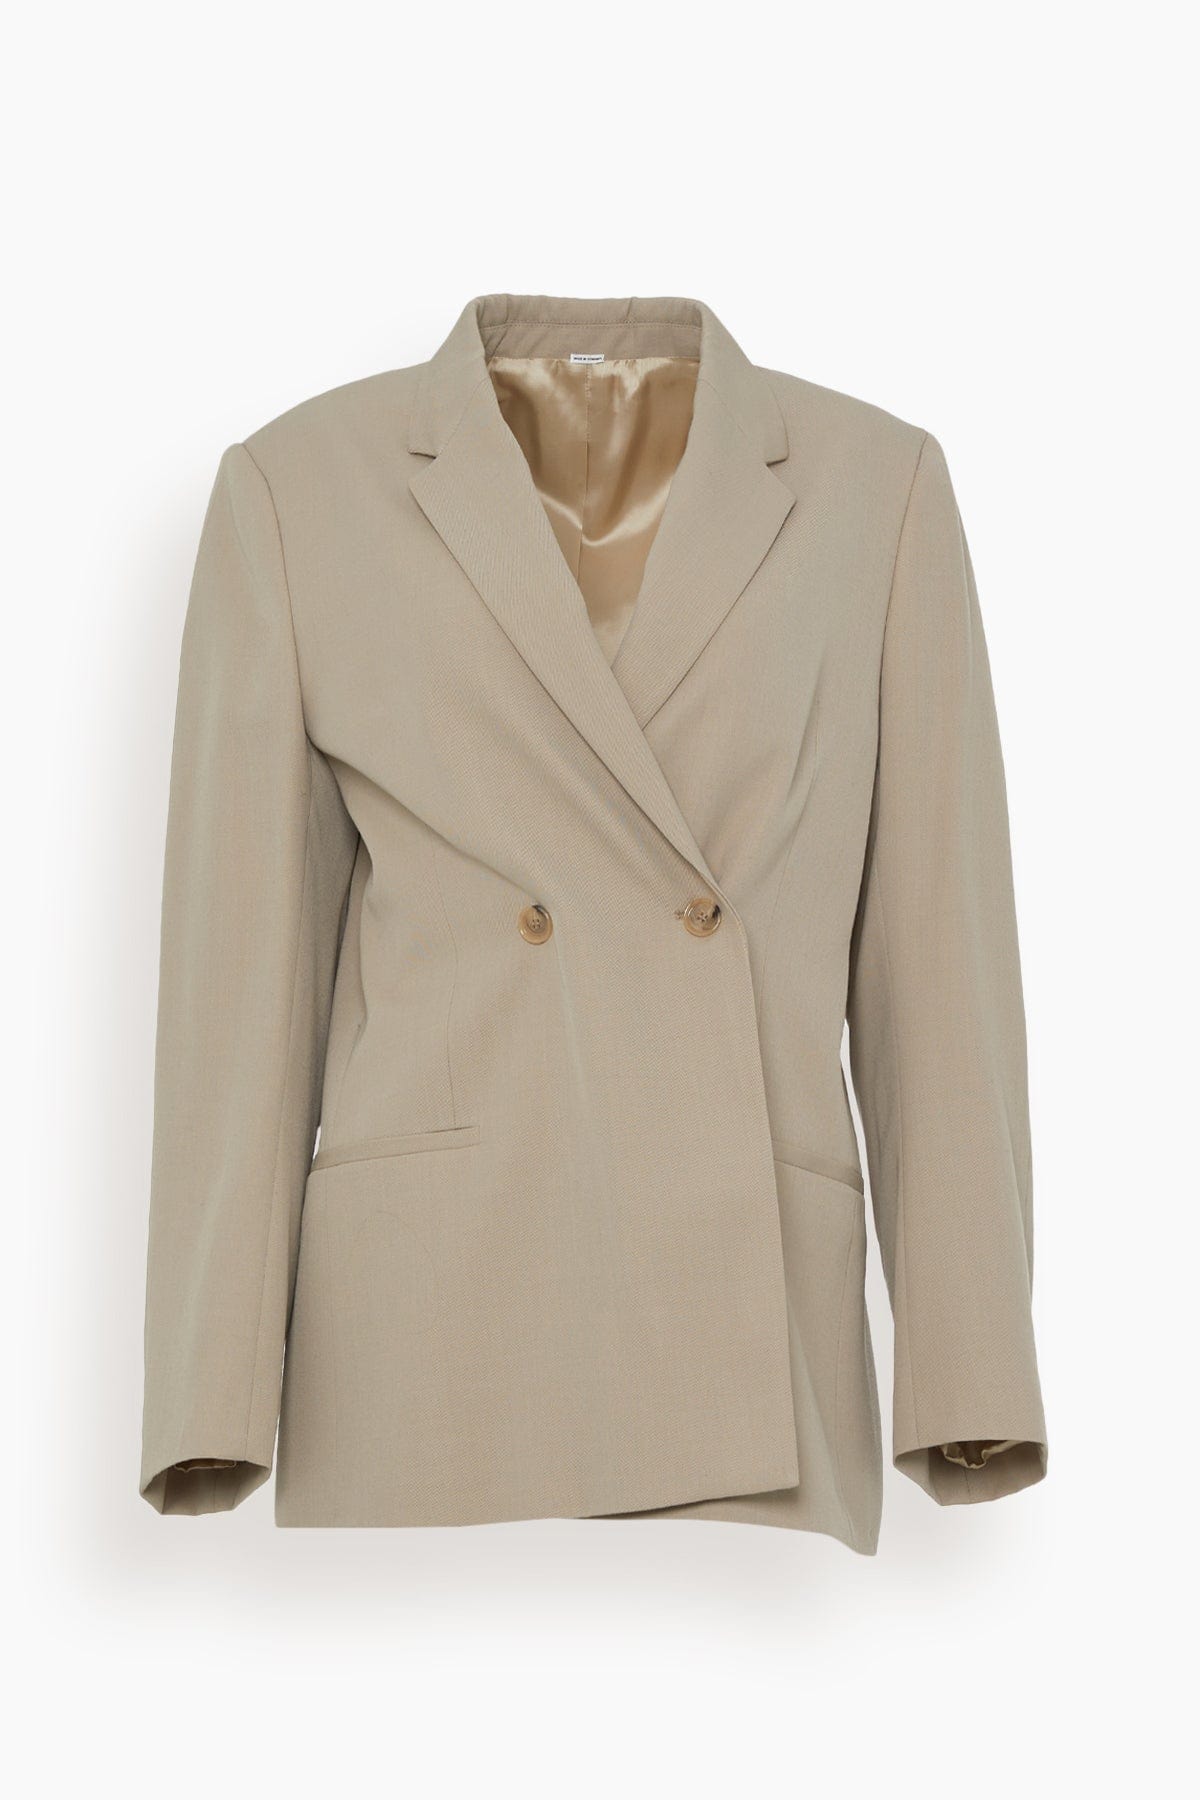 Toteme Jackets Double Breasted Vent Blazer in Beige